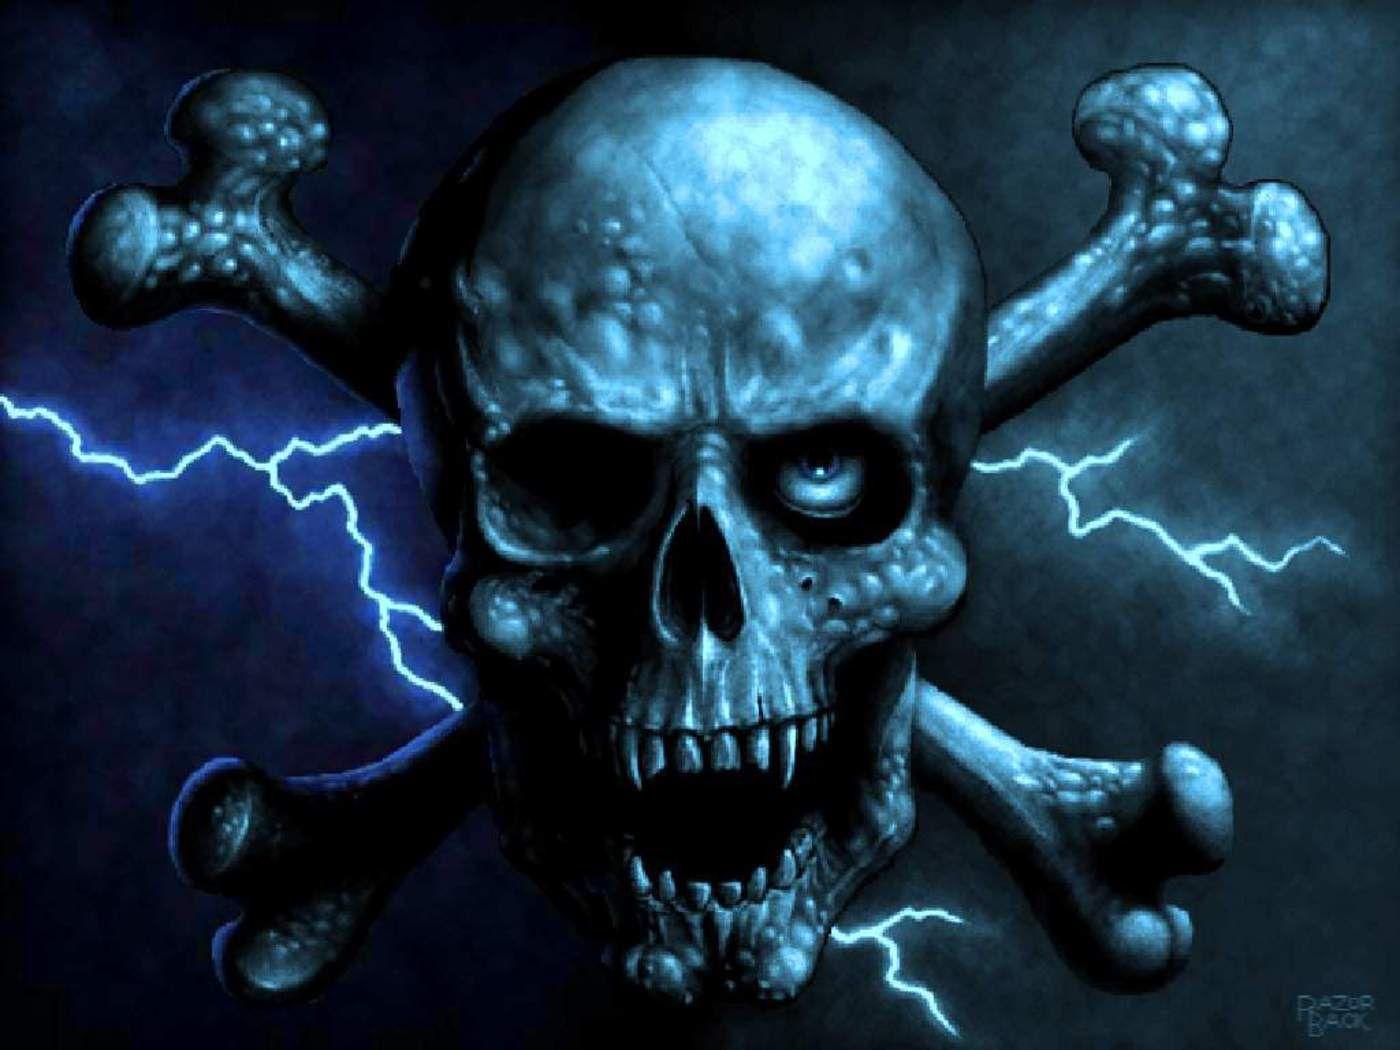 Awesome 3D Skull Wallpaper Awesome 3D Skull Wallpaper Free 3D